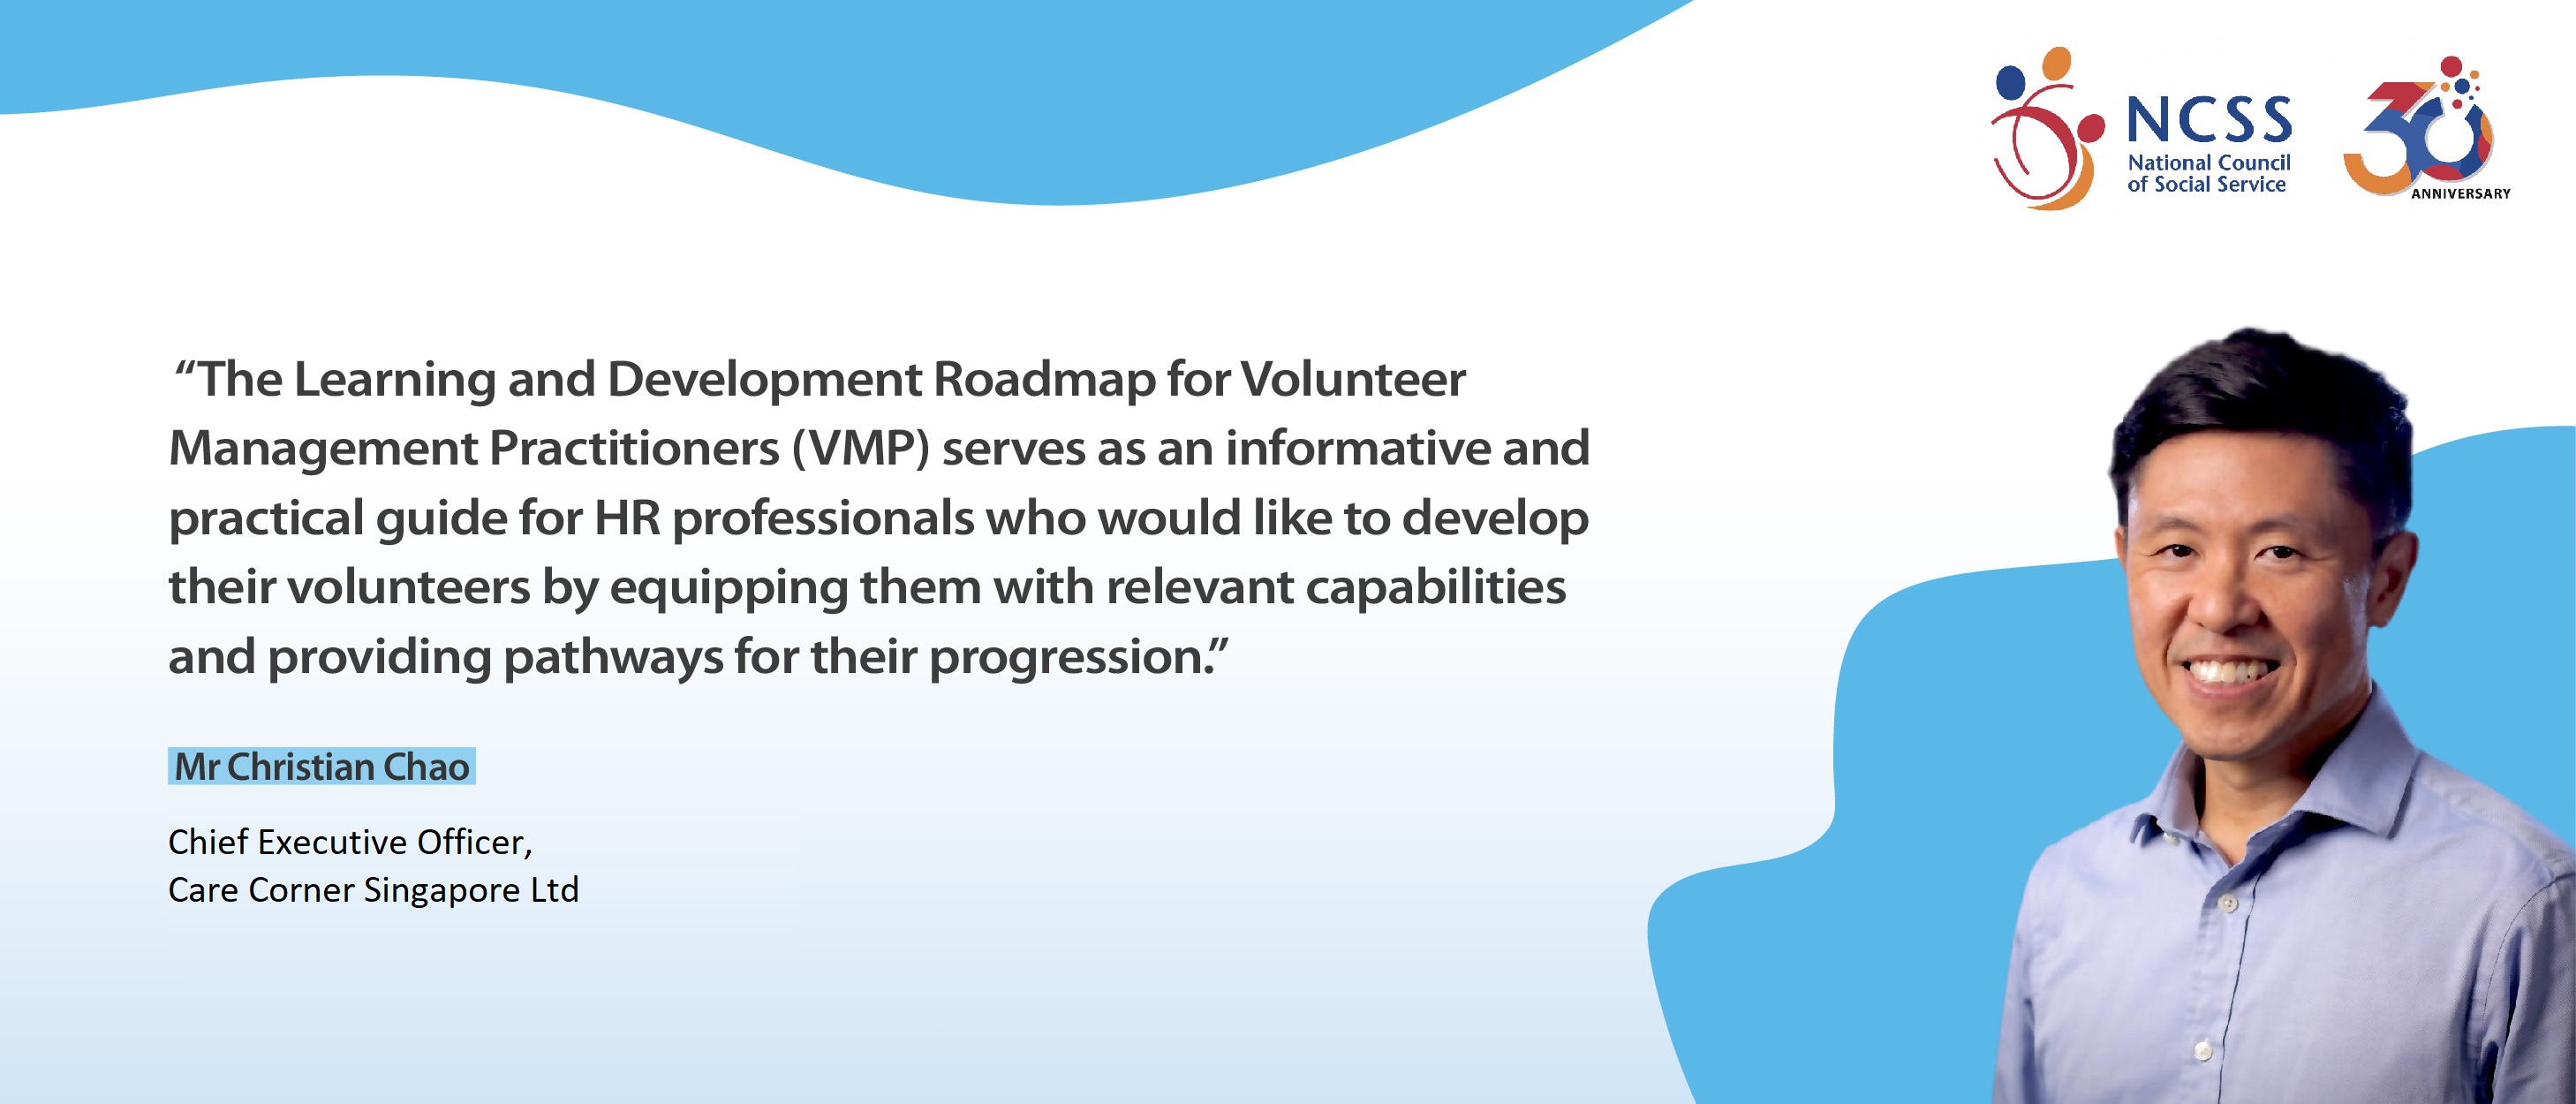 A comment about Learning & Development Roadmap by Senior director of People from Care Corner Singapore Ltd, Mr Christian Chao, "The Learning and development roadmap for volunteer management practitioners (vmp) serves as an informative and practical guide for HR professionals who would like to develop their volunteers by equipping them with relevant capabilities and providing pathways for their progression."